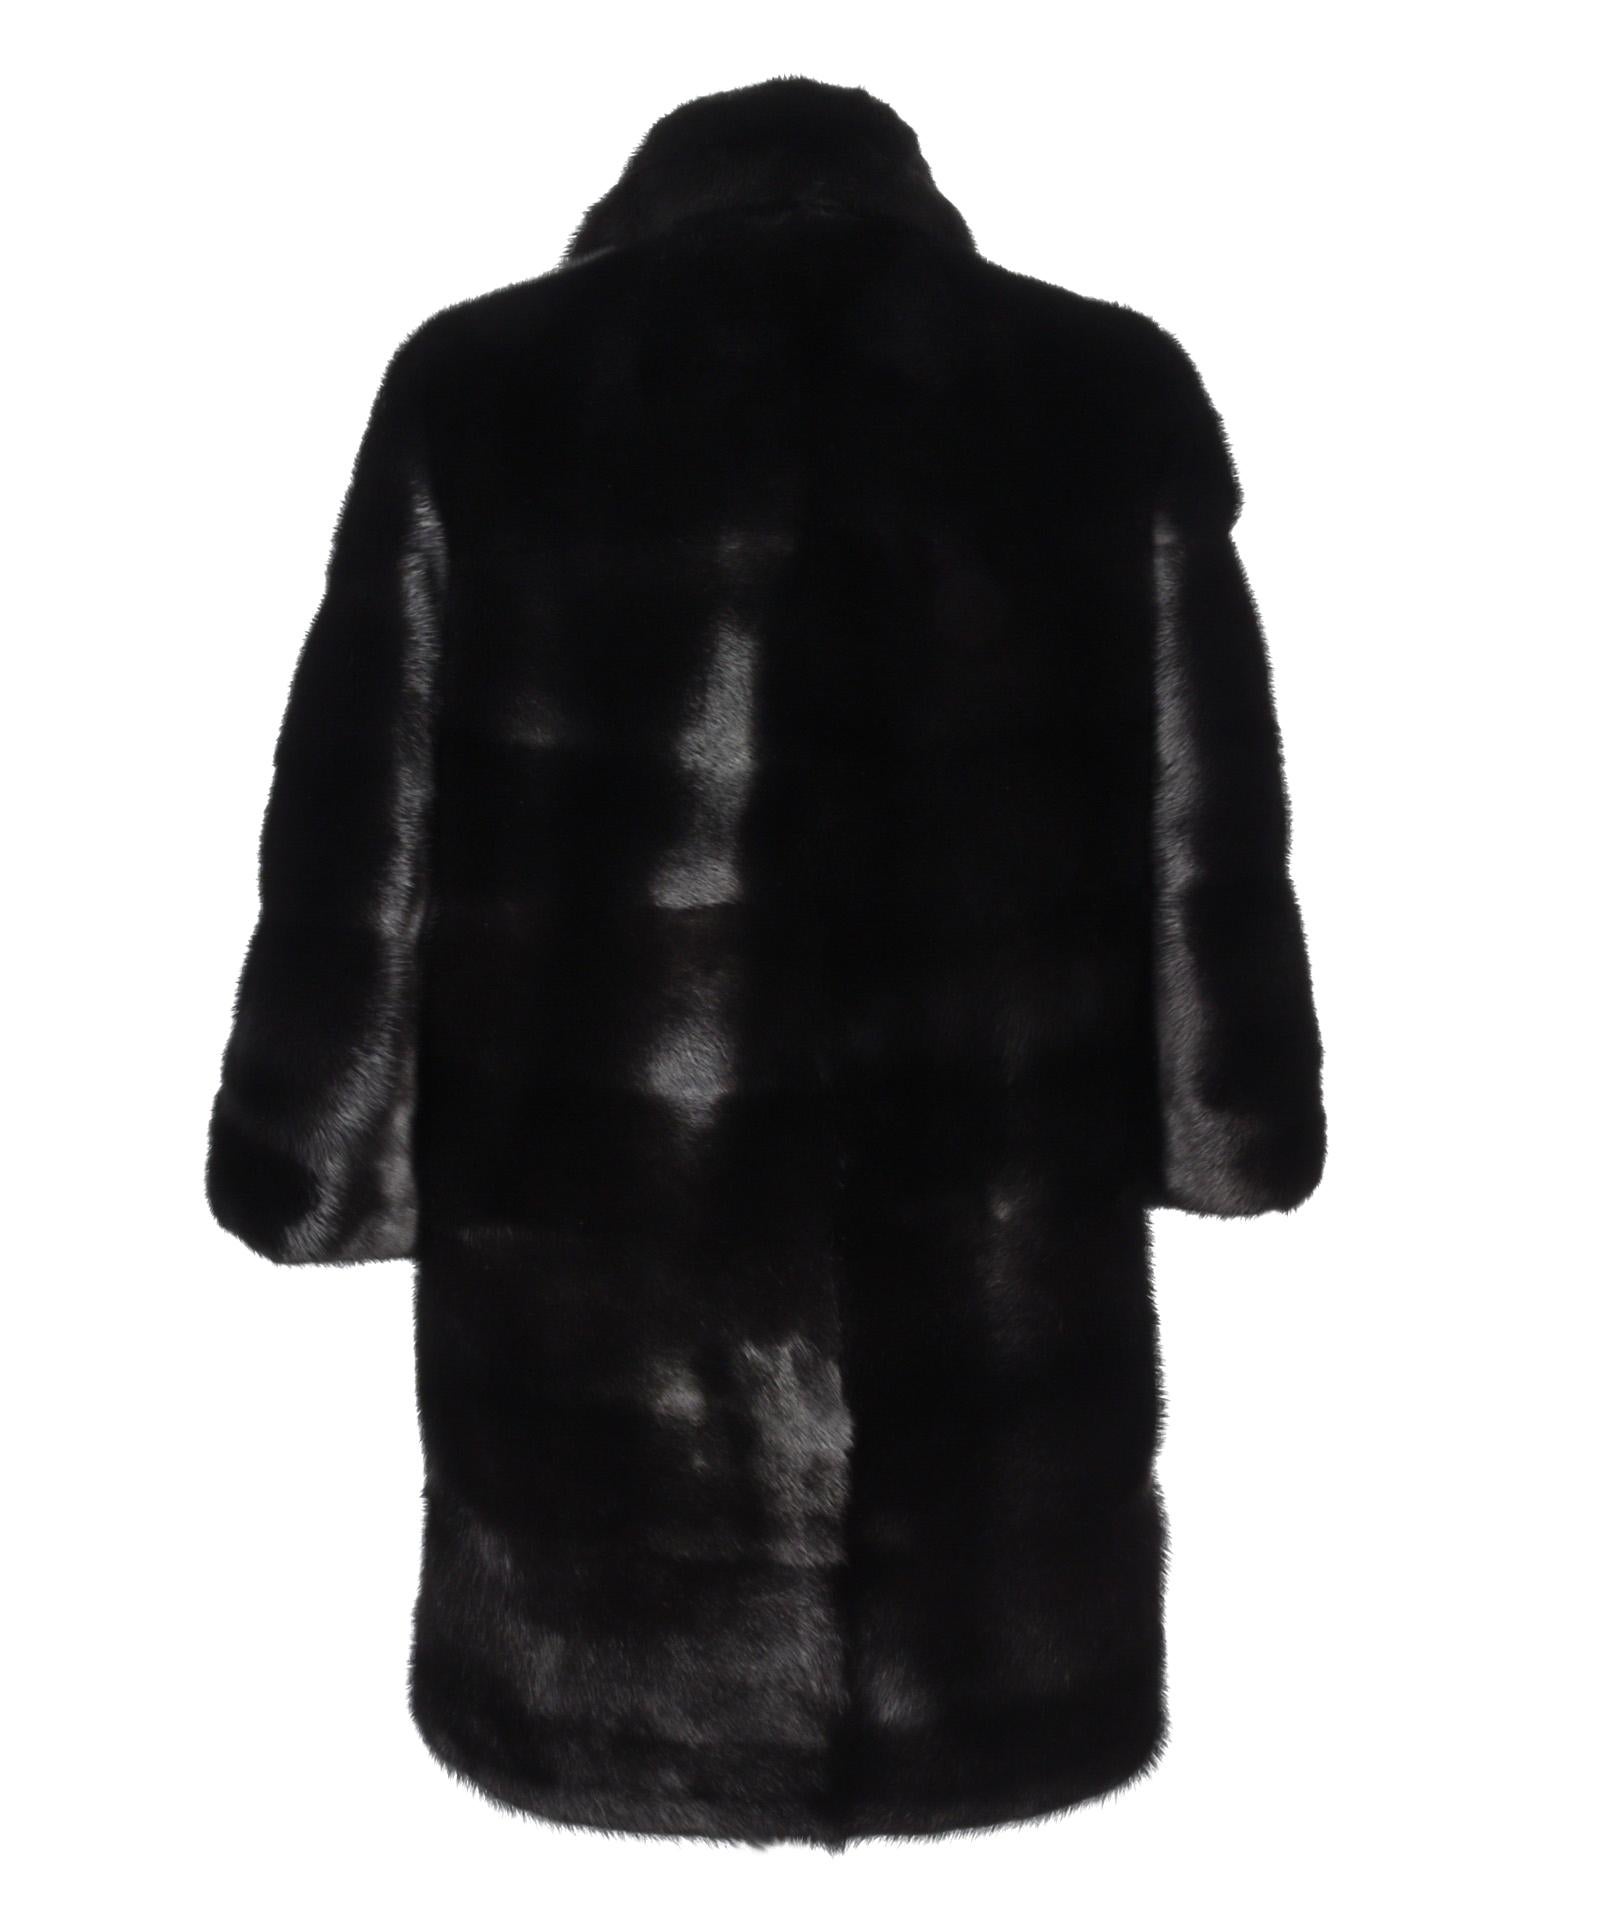 Women's Gucci Coat Black Glossy Mink 3/4 Sleeve Knee Length 42 / Fits 6 to 8 New